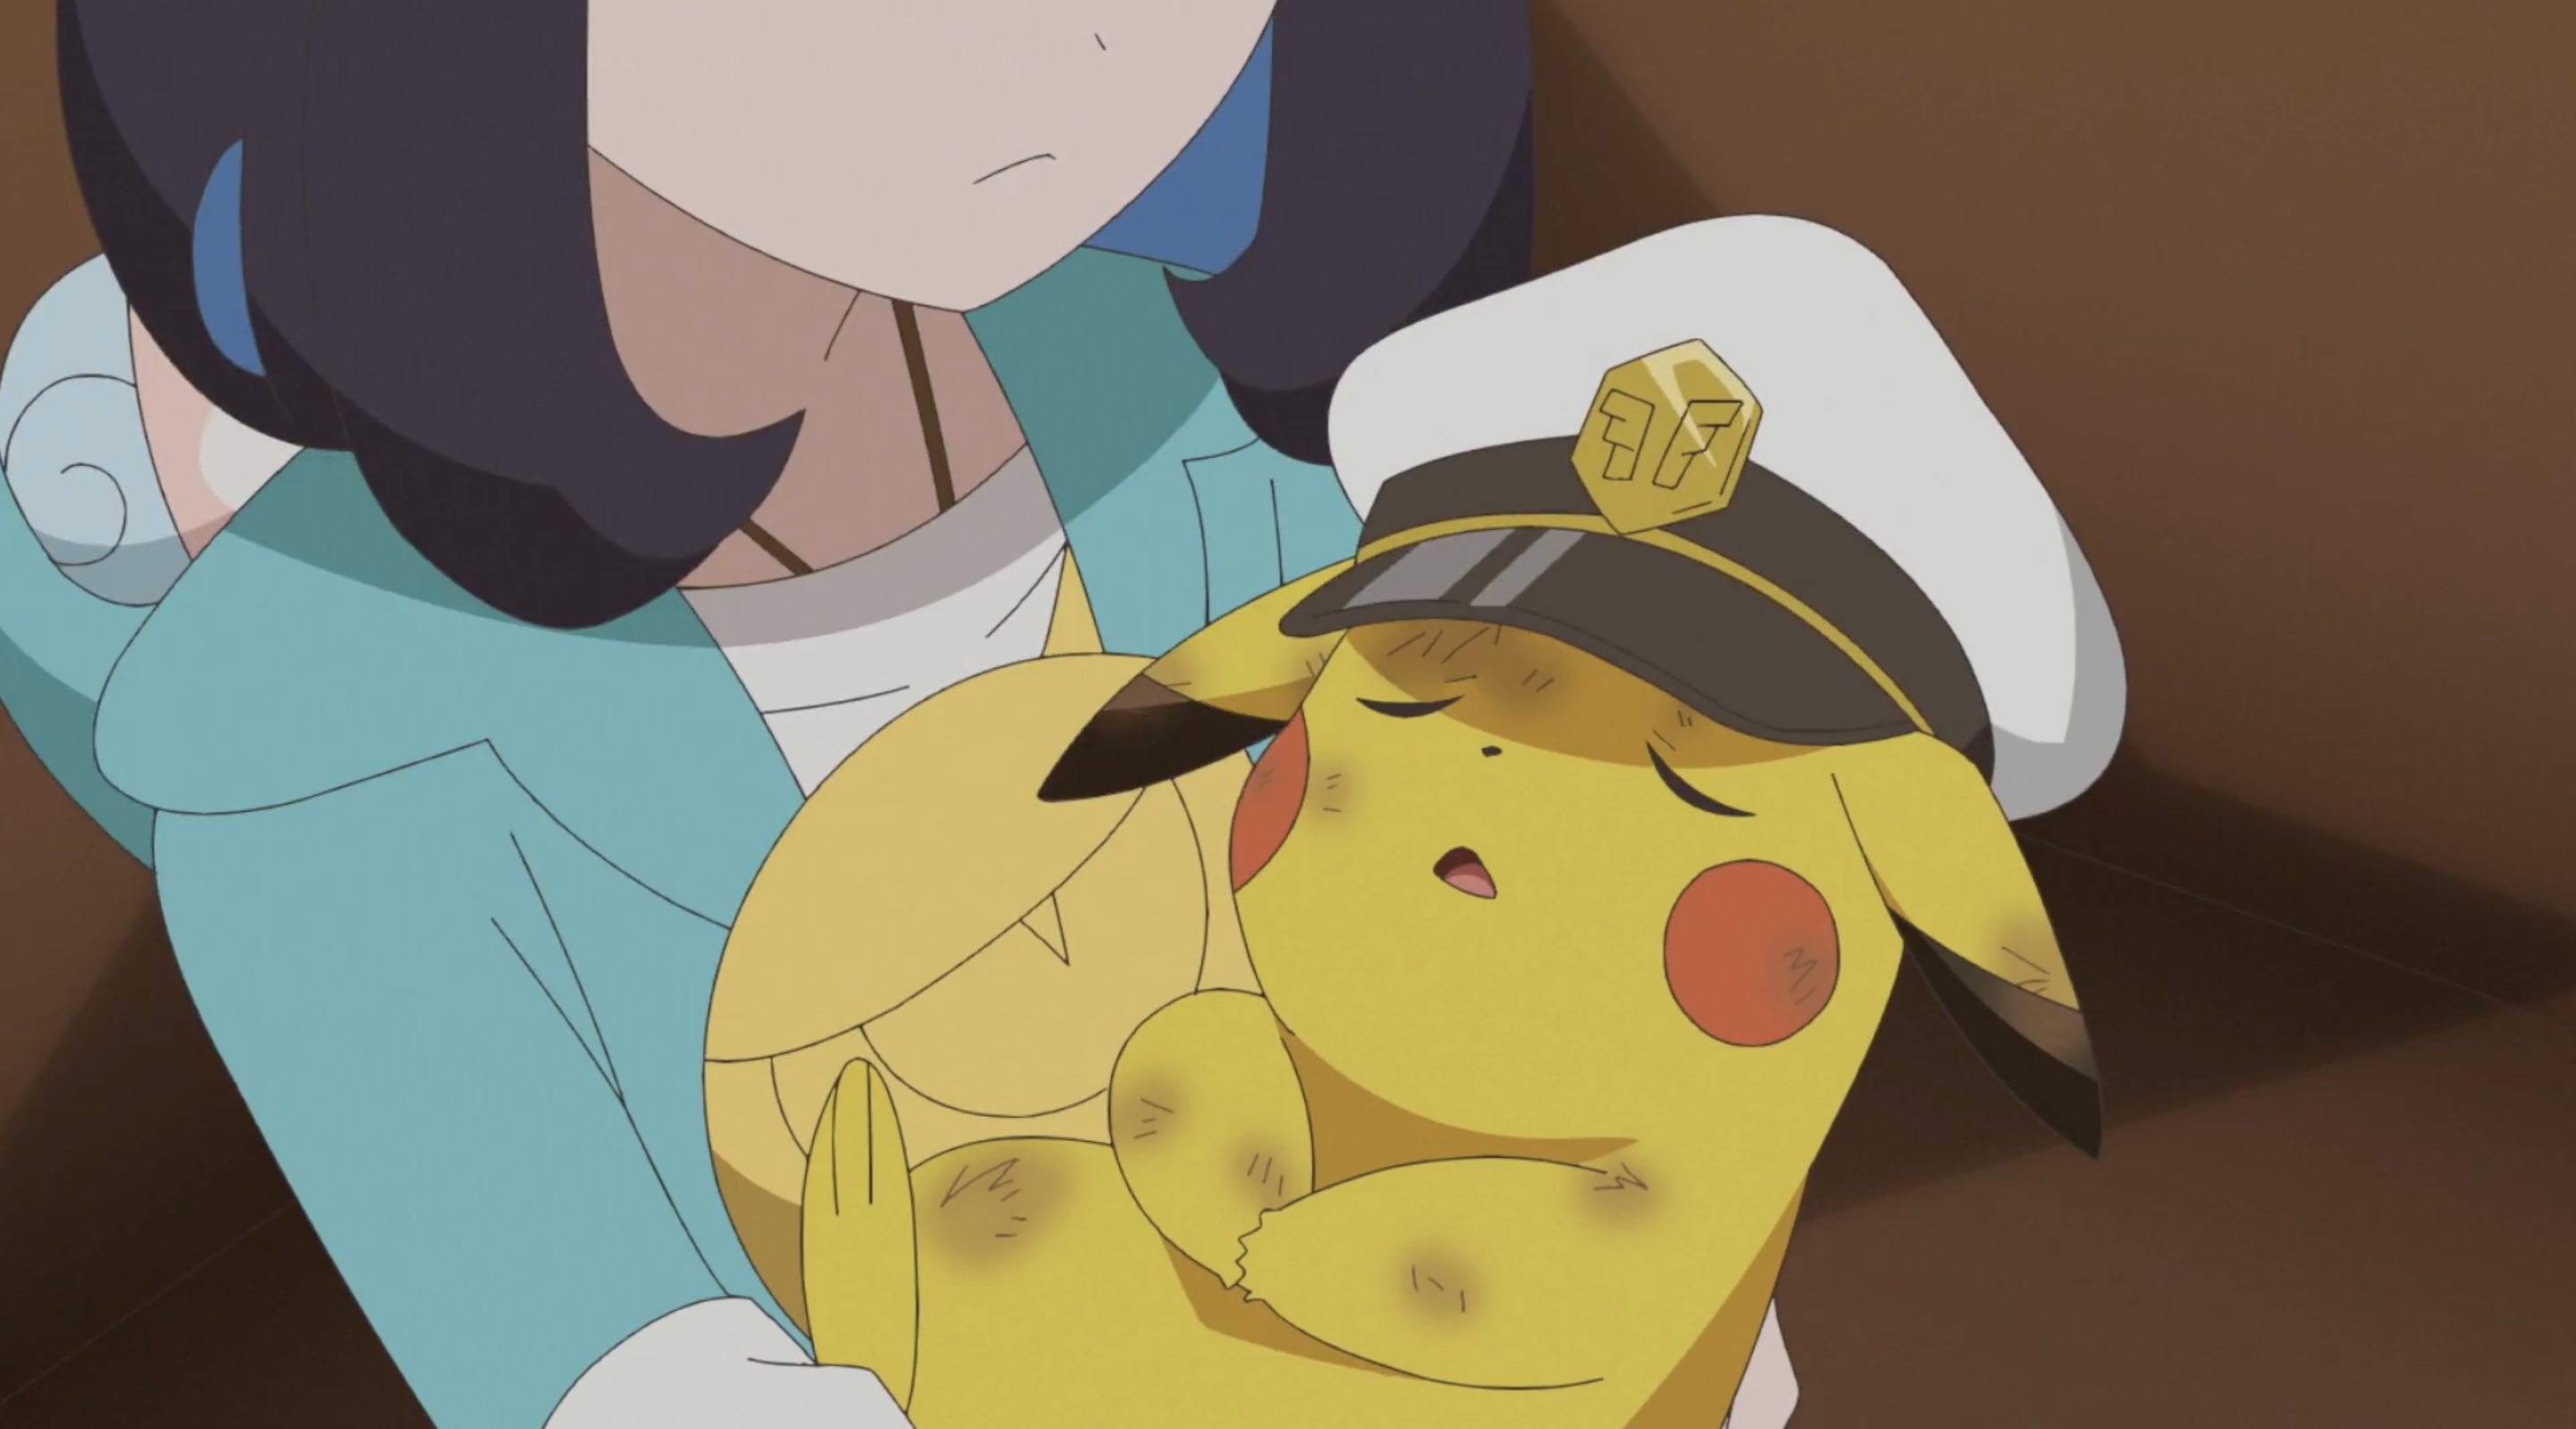 Liko cradling a battered and bruised Captain Pikachu